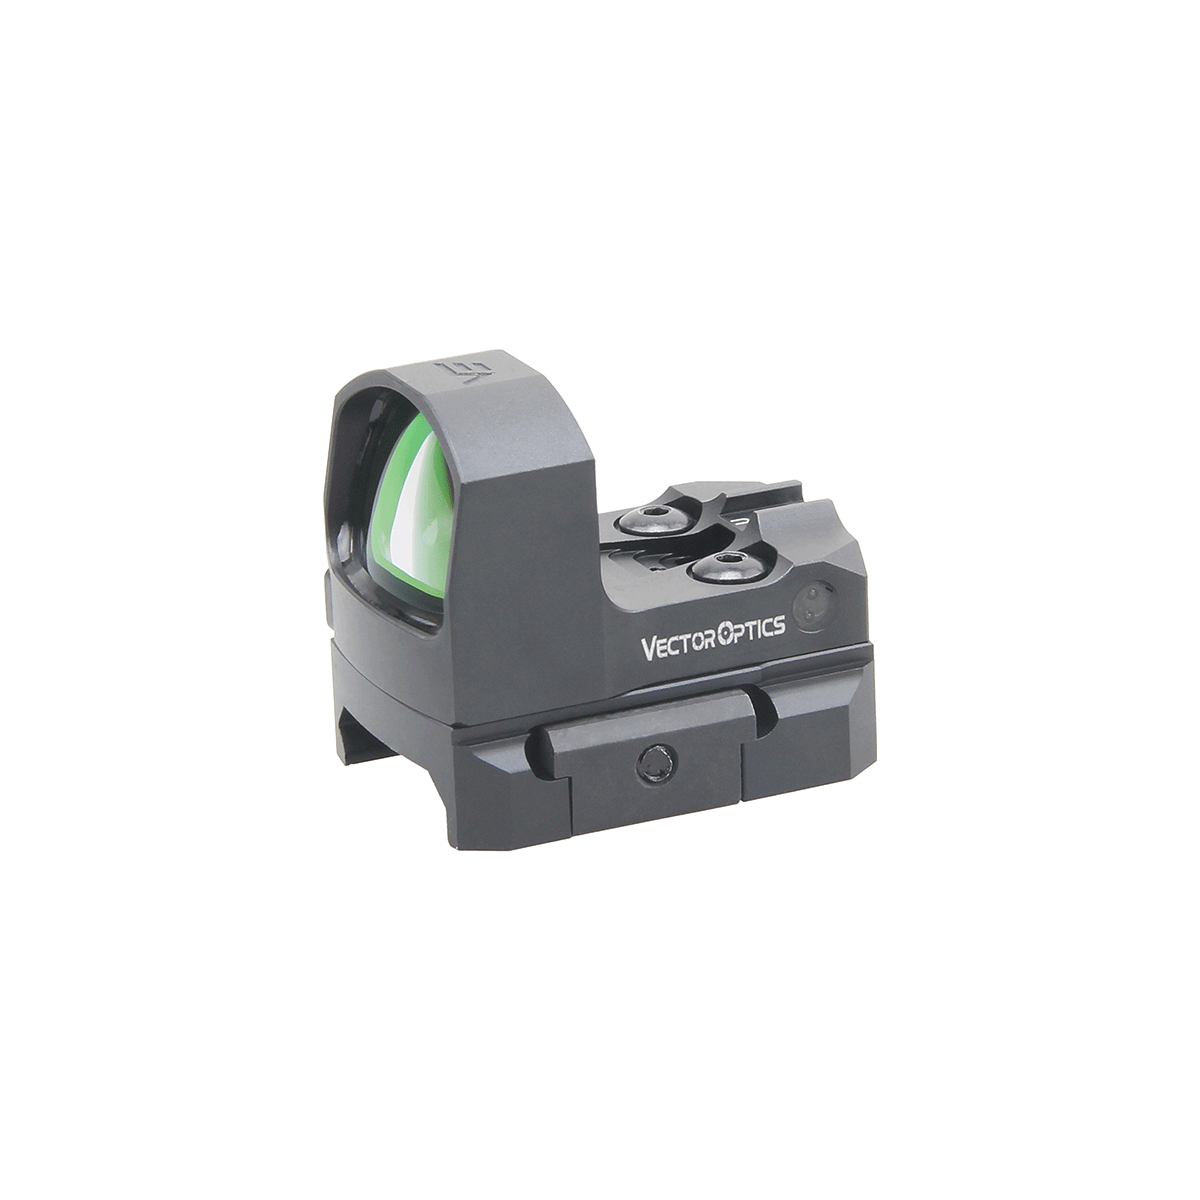 Frenzy-S 1x17x24 MIC AUT Battery Side Loading Red Dot Sight